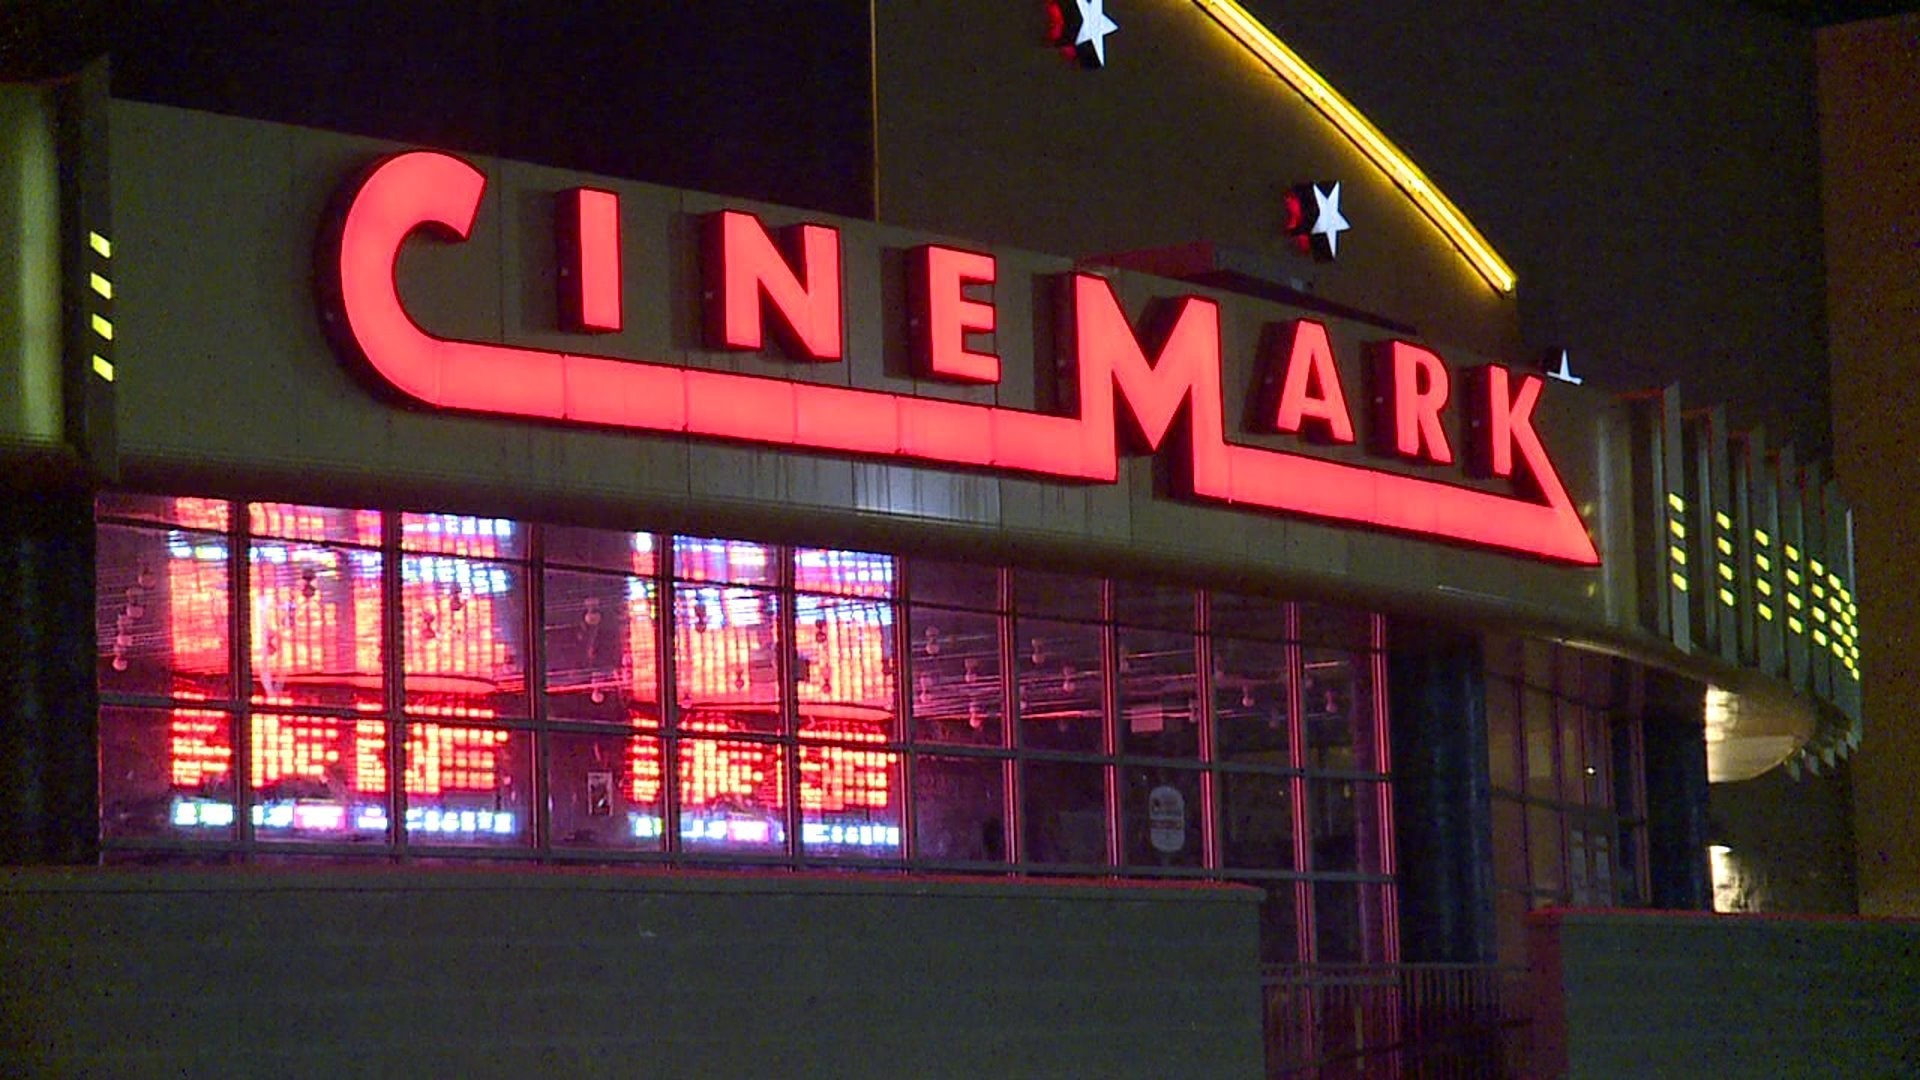 The movie theater in Moosic plans on showing both new and classic films.